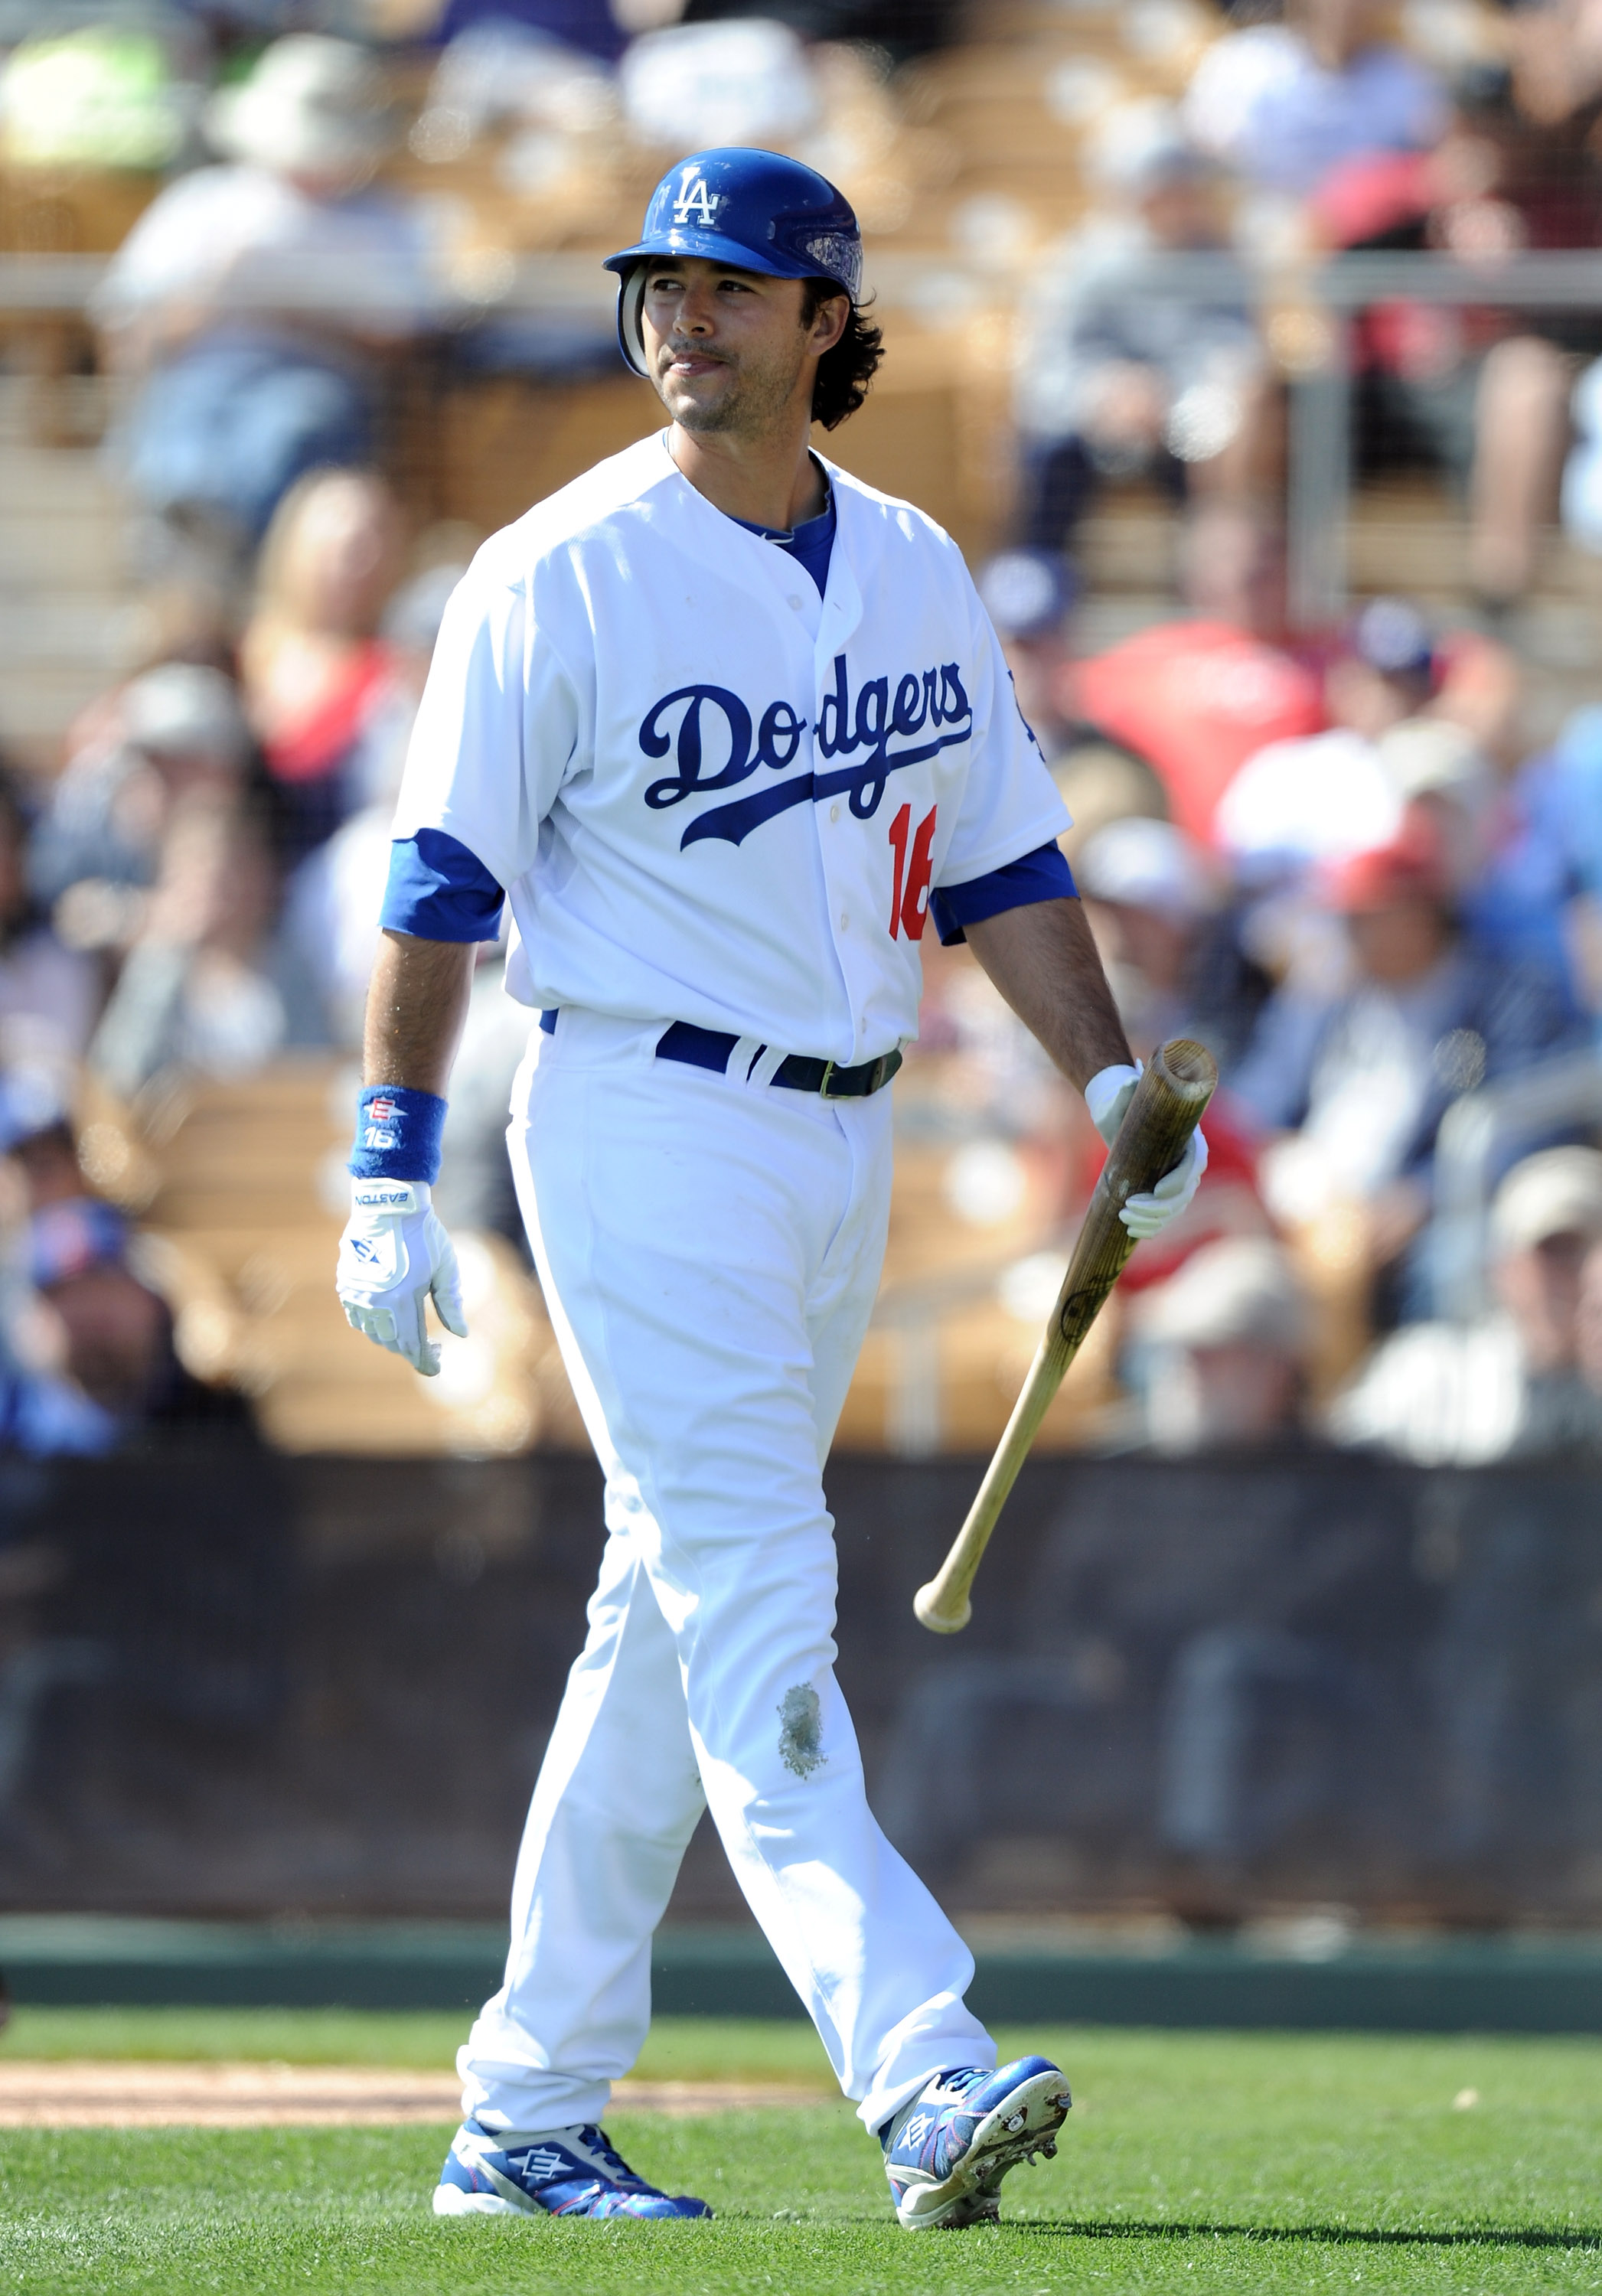 PHOENIX, AZ - FEBRUARY 27:  Andre Ethier #16 of the Los Angeles Dodgers at bat during spring training at Camelback Ranch on February 27, 2011 in Phoenix, Arizona.  (Photo by Harry How/Getty Images)